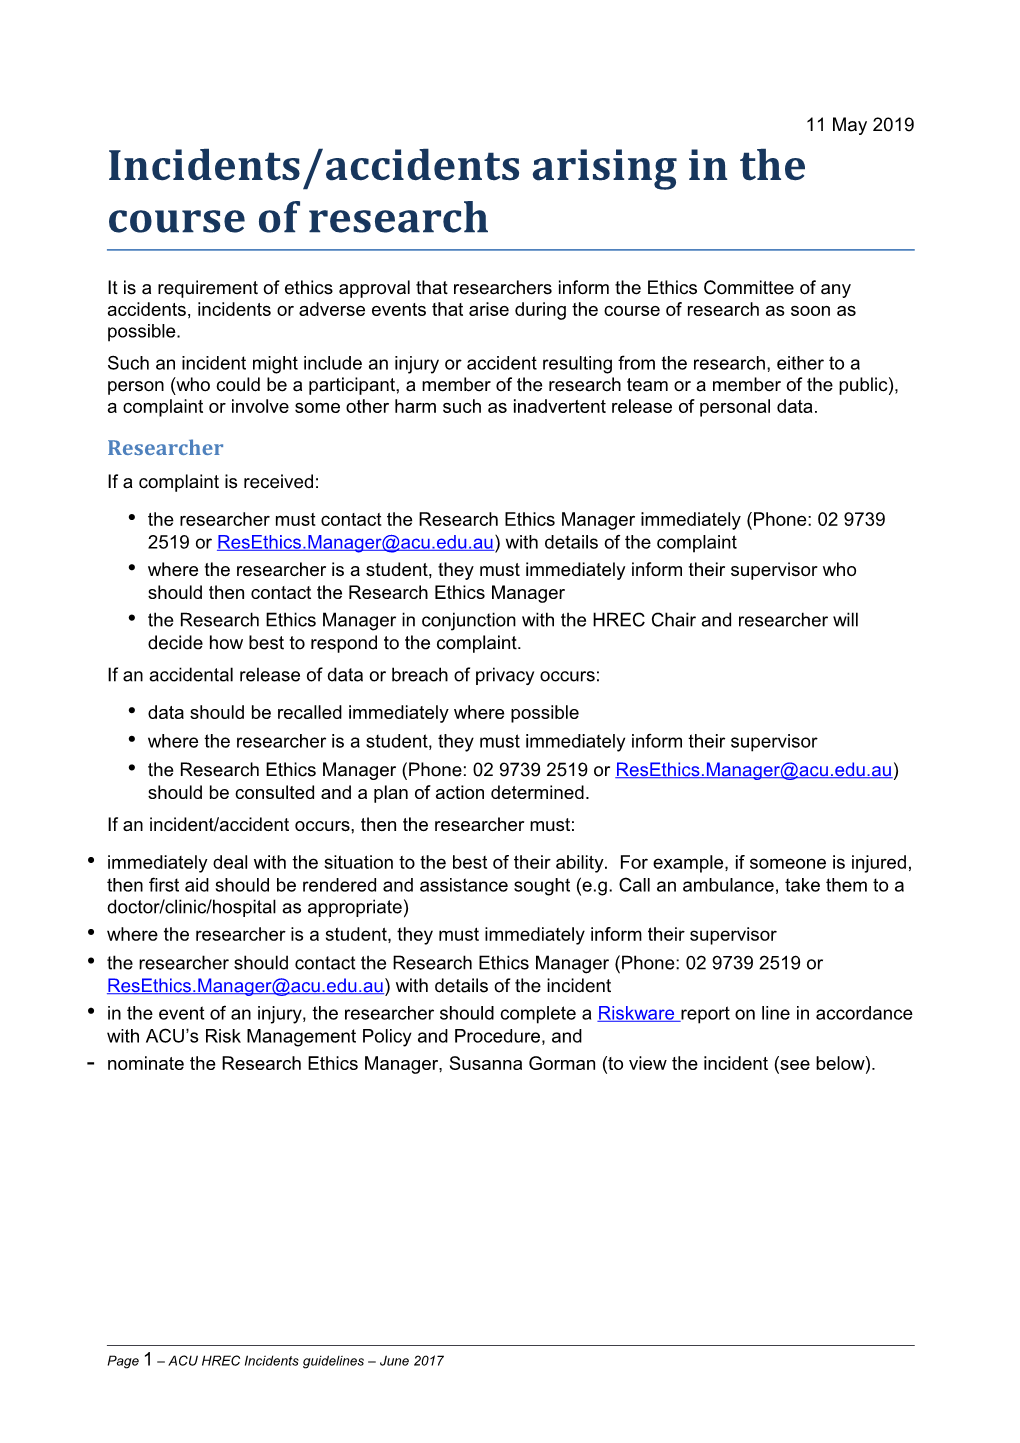 Incidents/Accidents Arising in the Course of Research